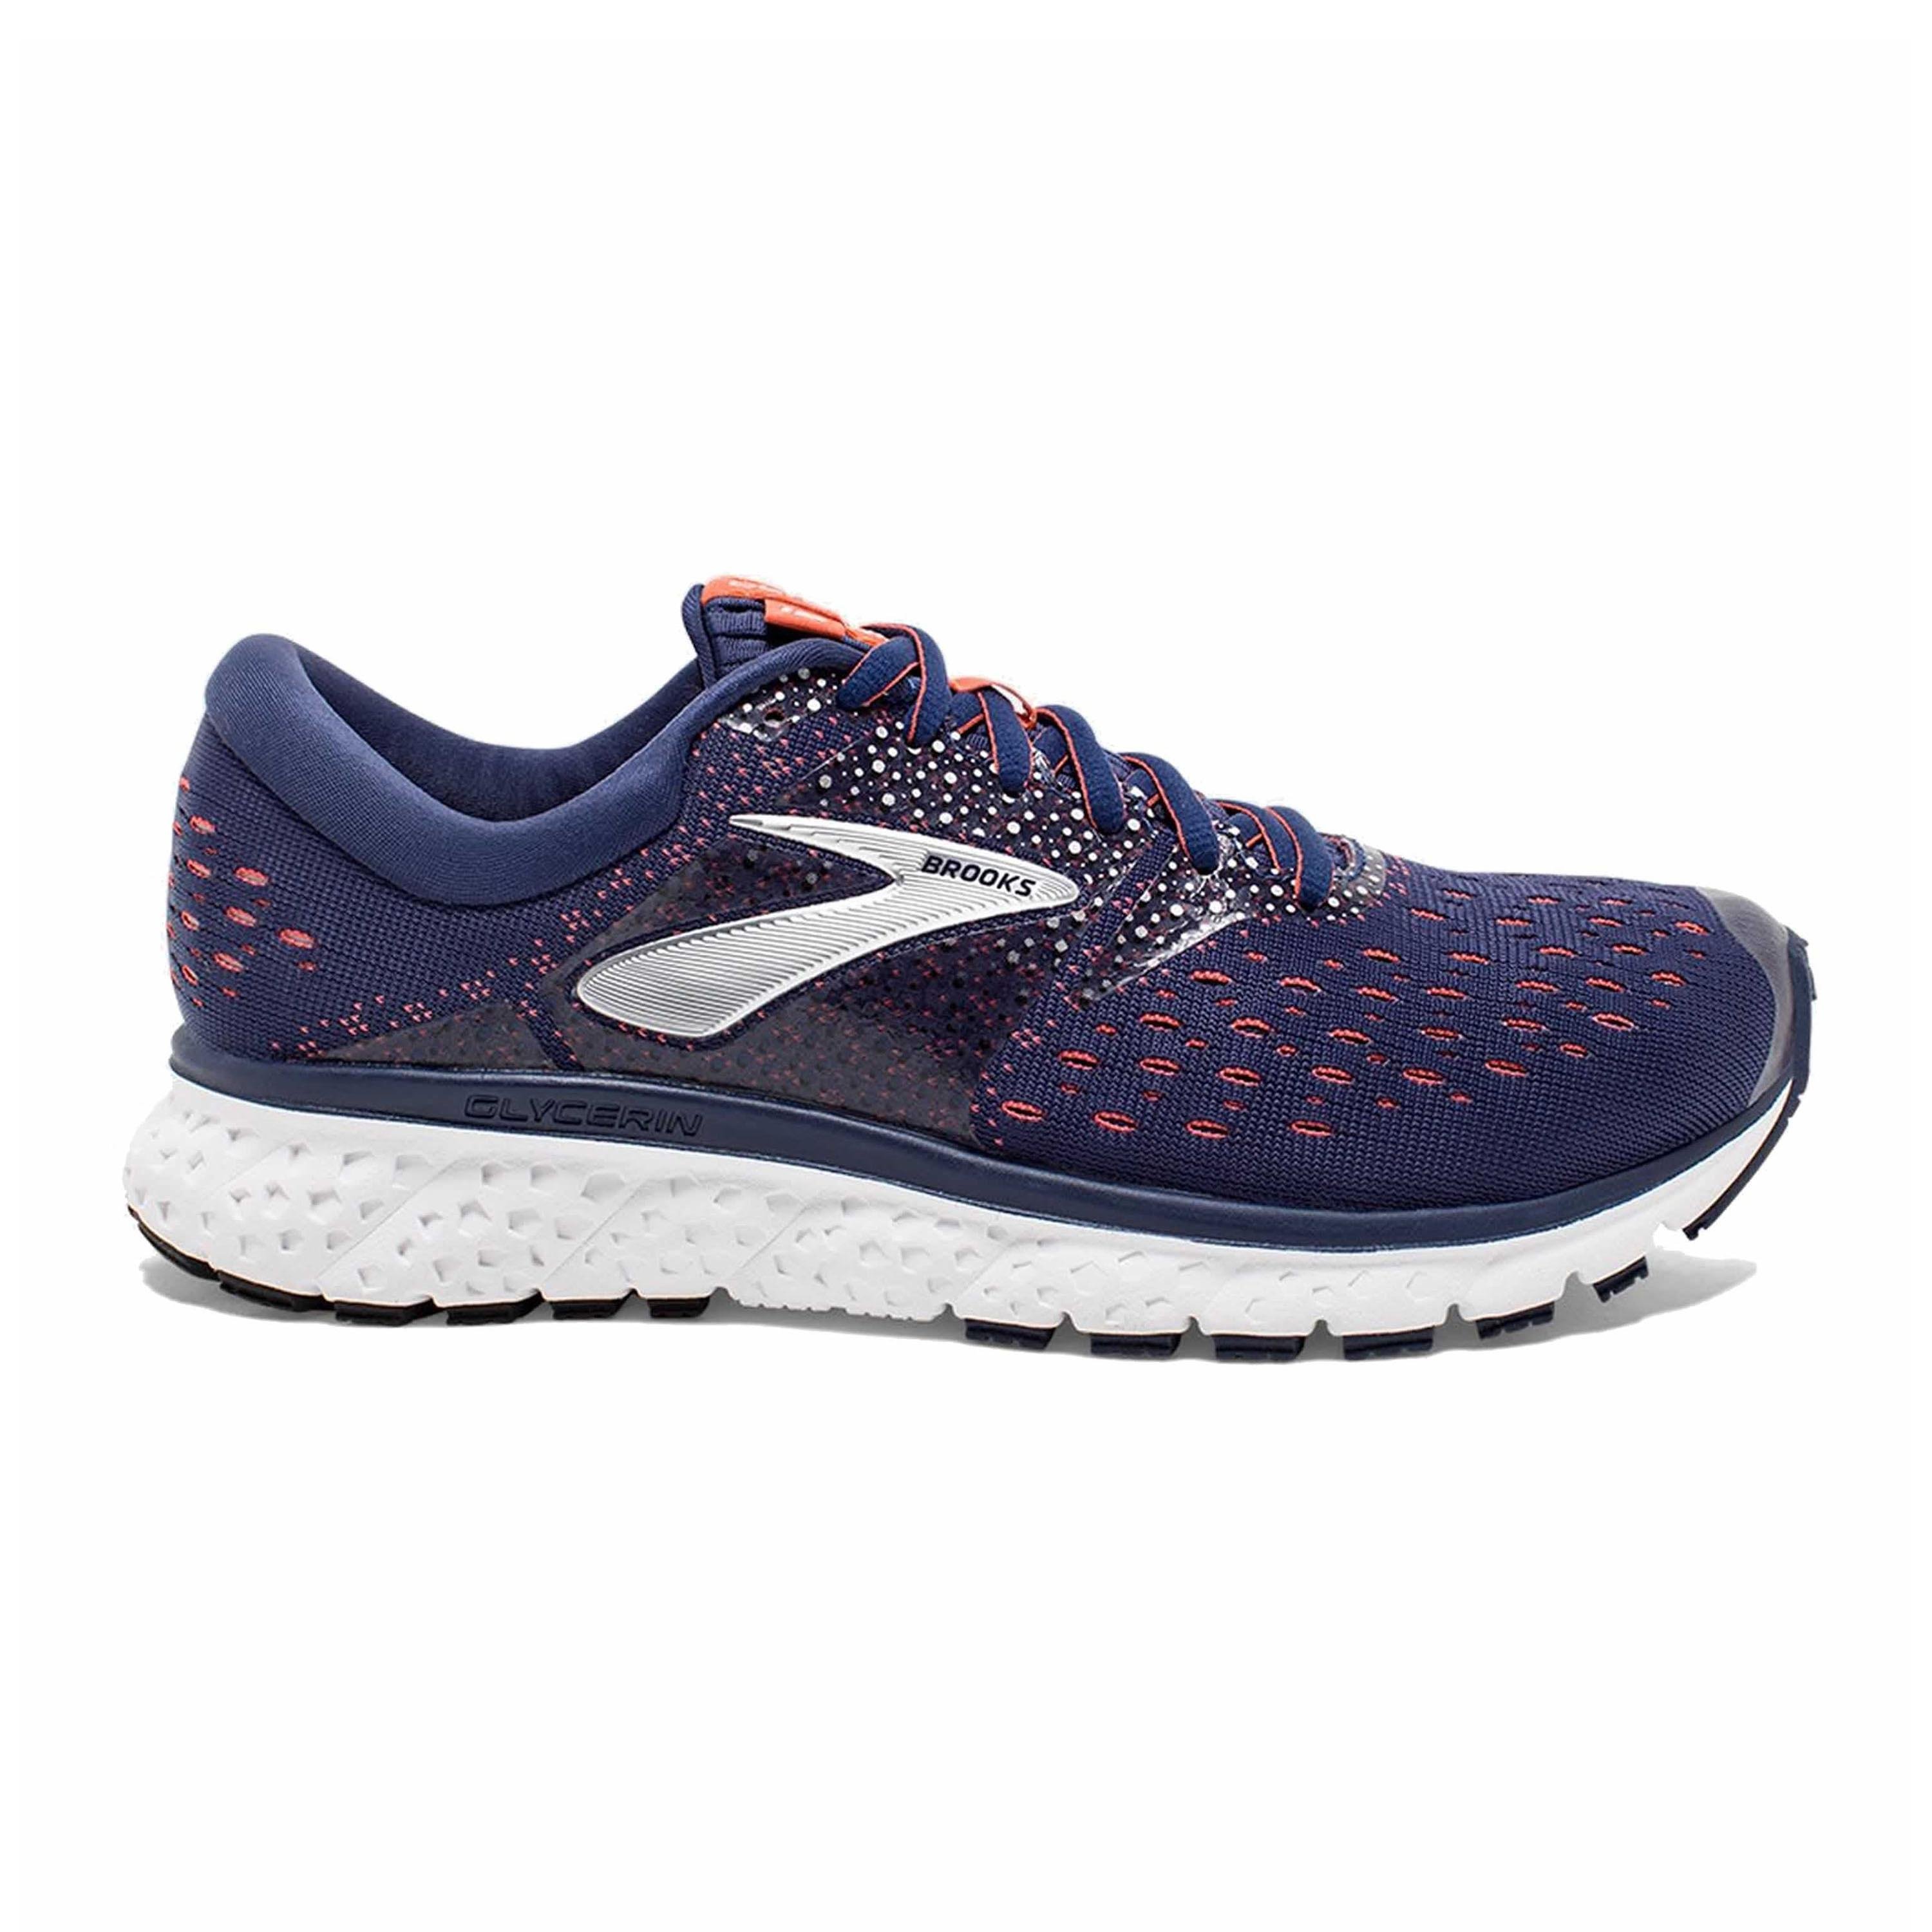 Brooks Glycerin 16 Road Running Shoes in Blue - Lyst